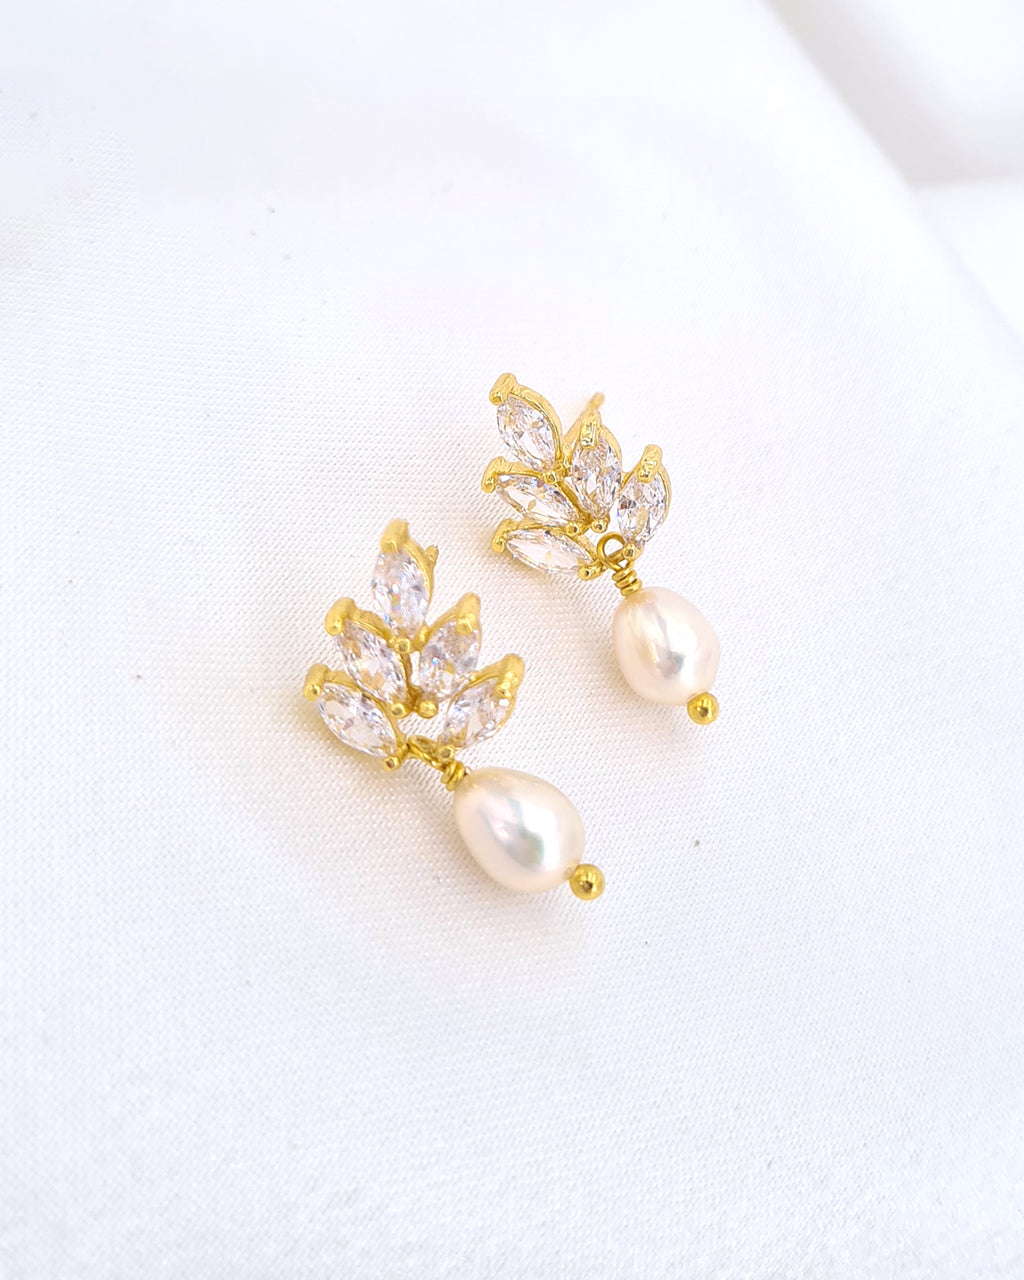 Discover 125+ gold earrings designs under 5000